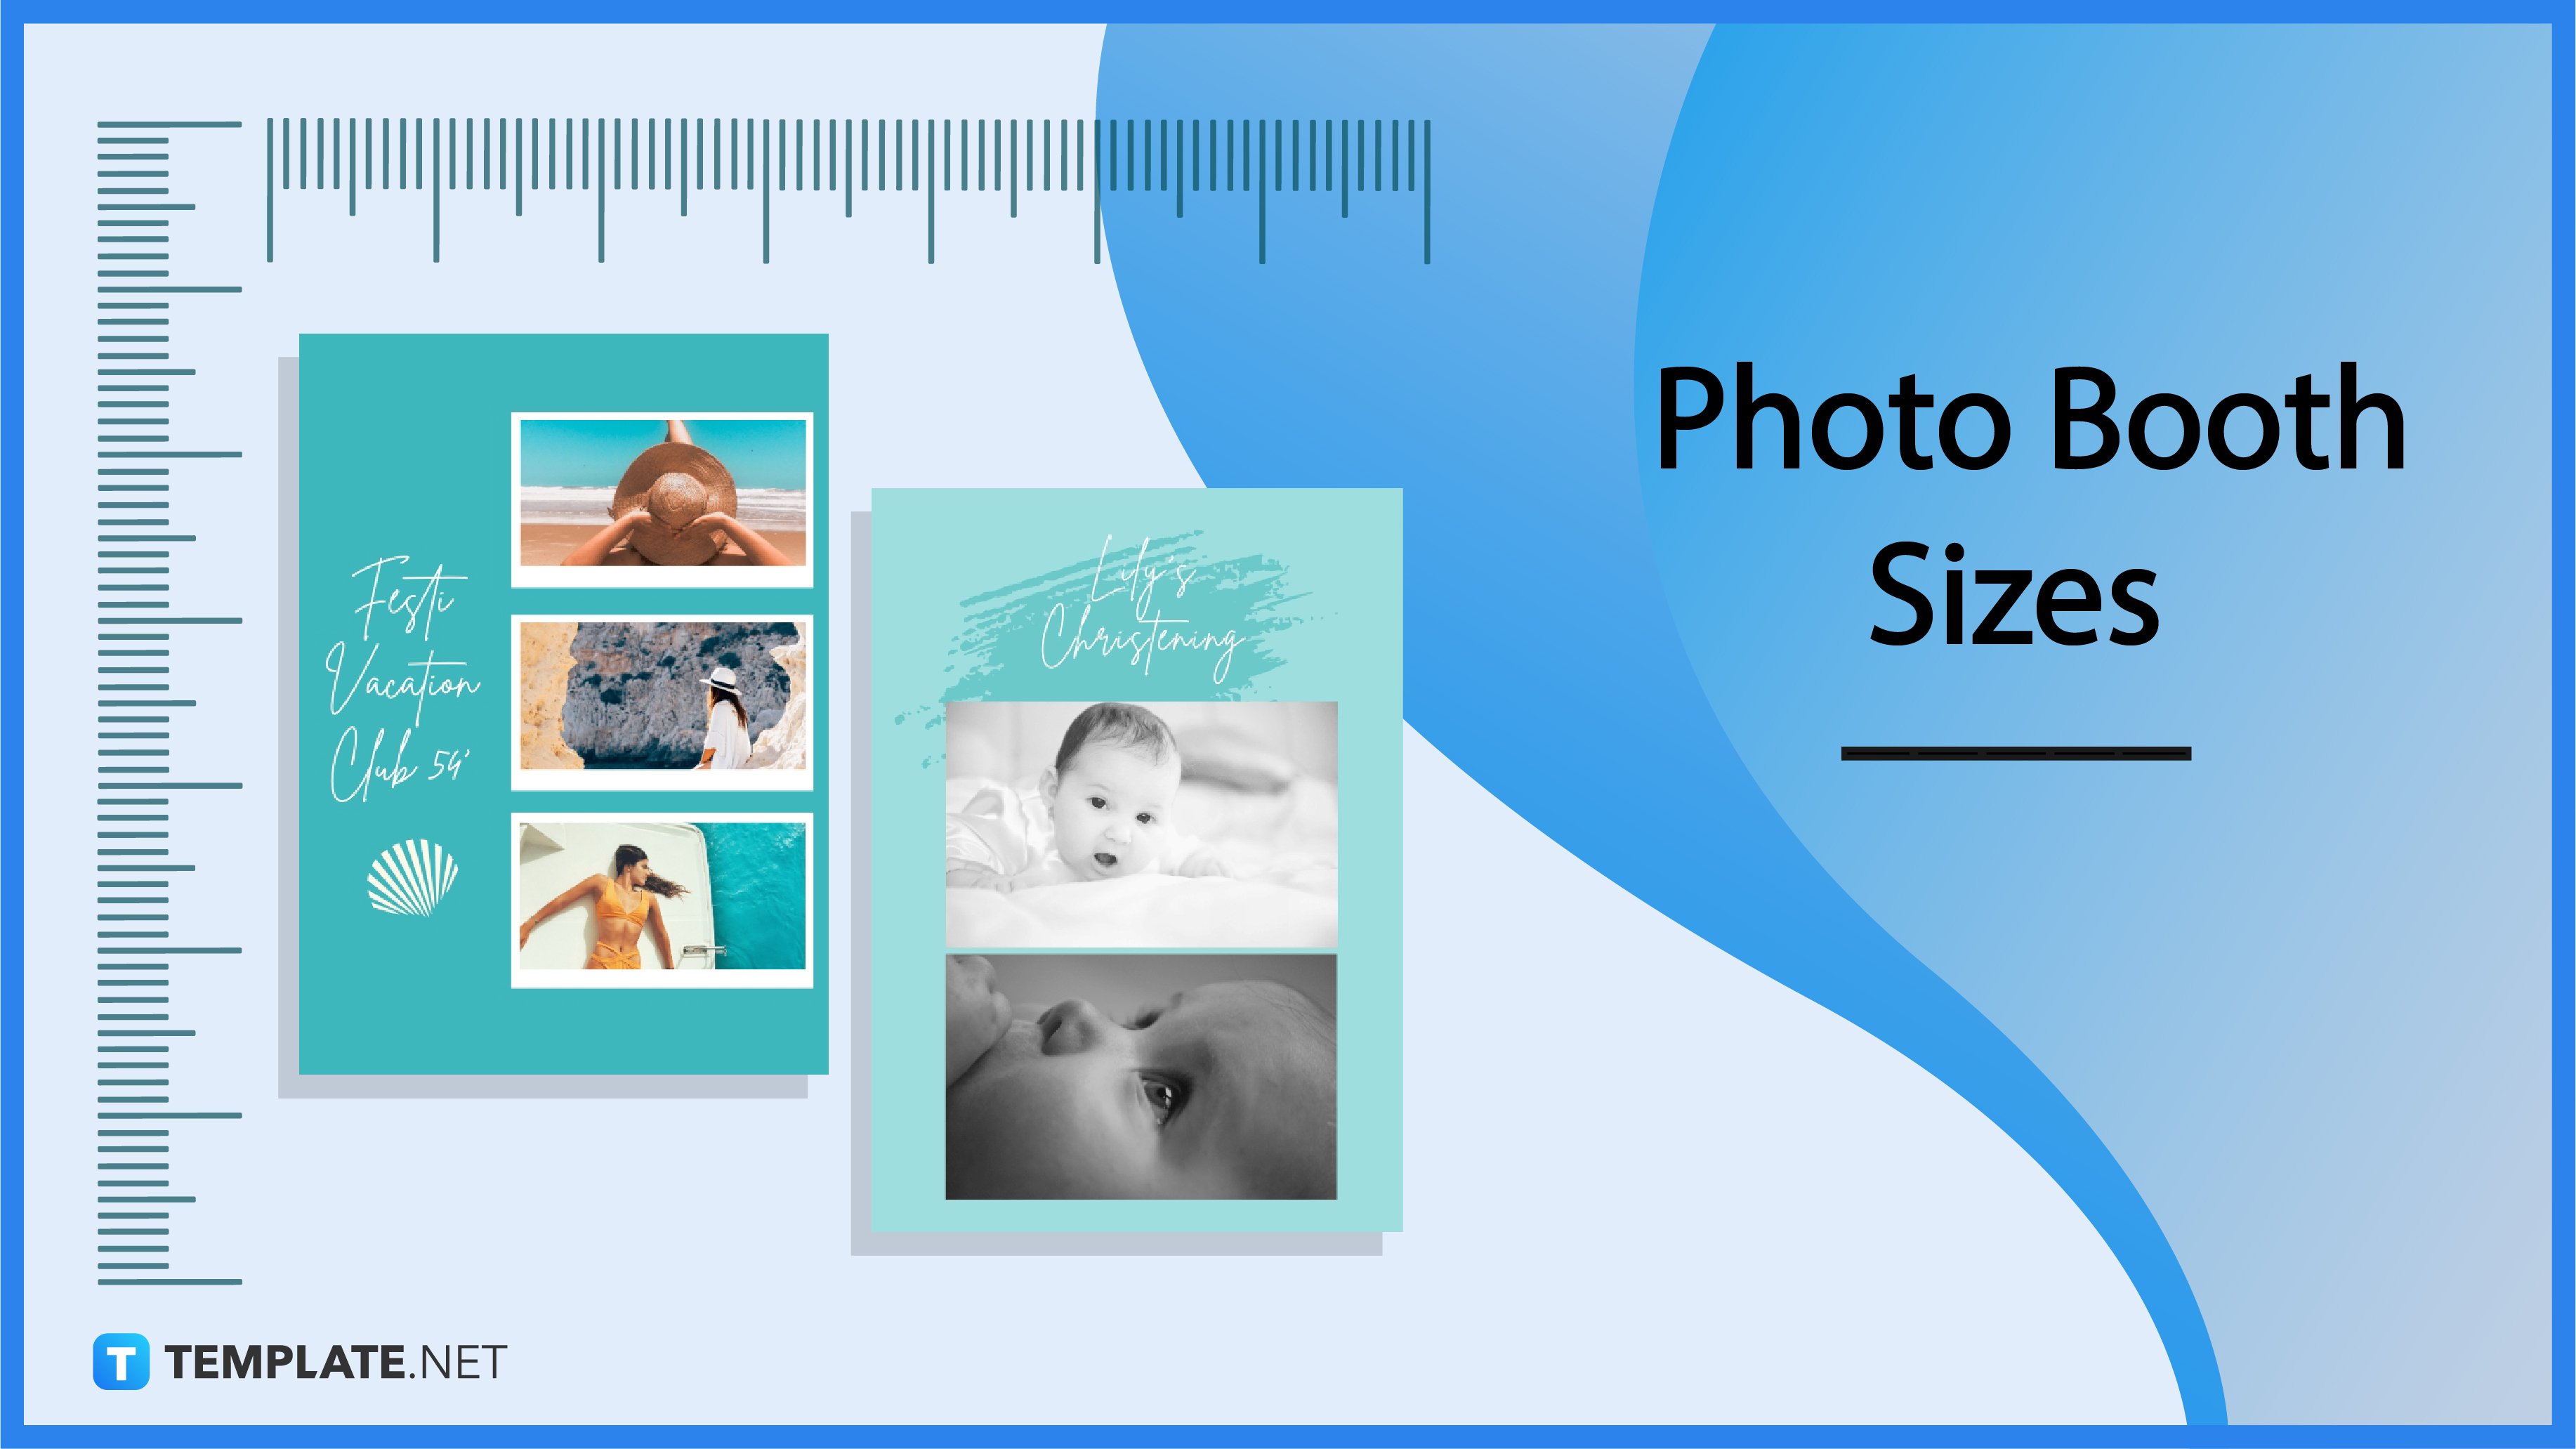 https://images.template.net/wp-content/uploads/2023/01/Photo-Booth-Sizes.jpg